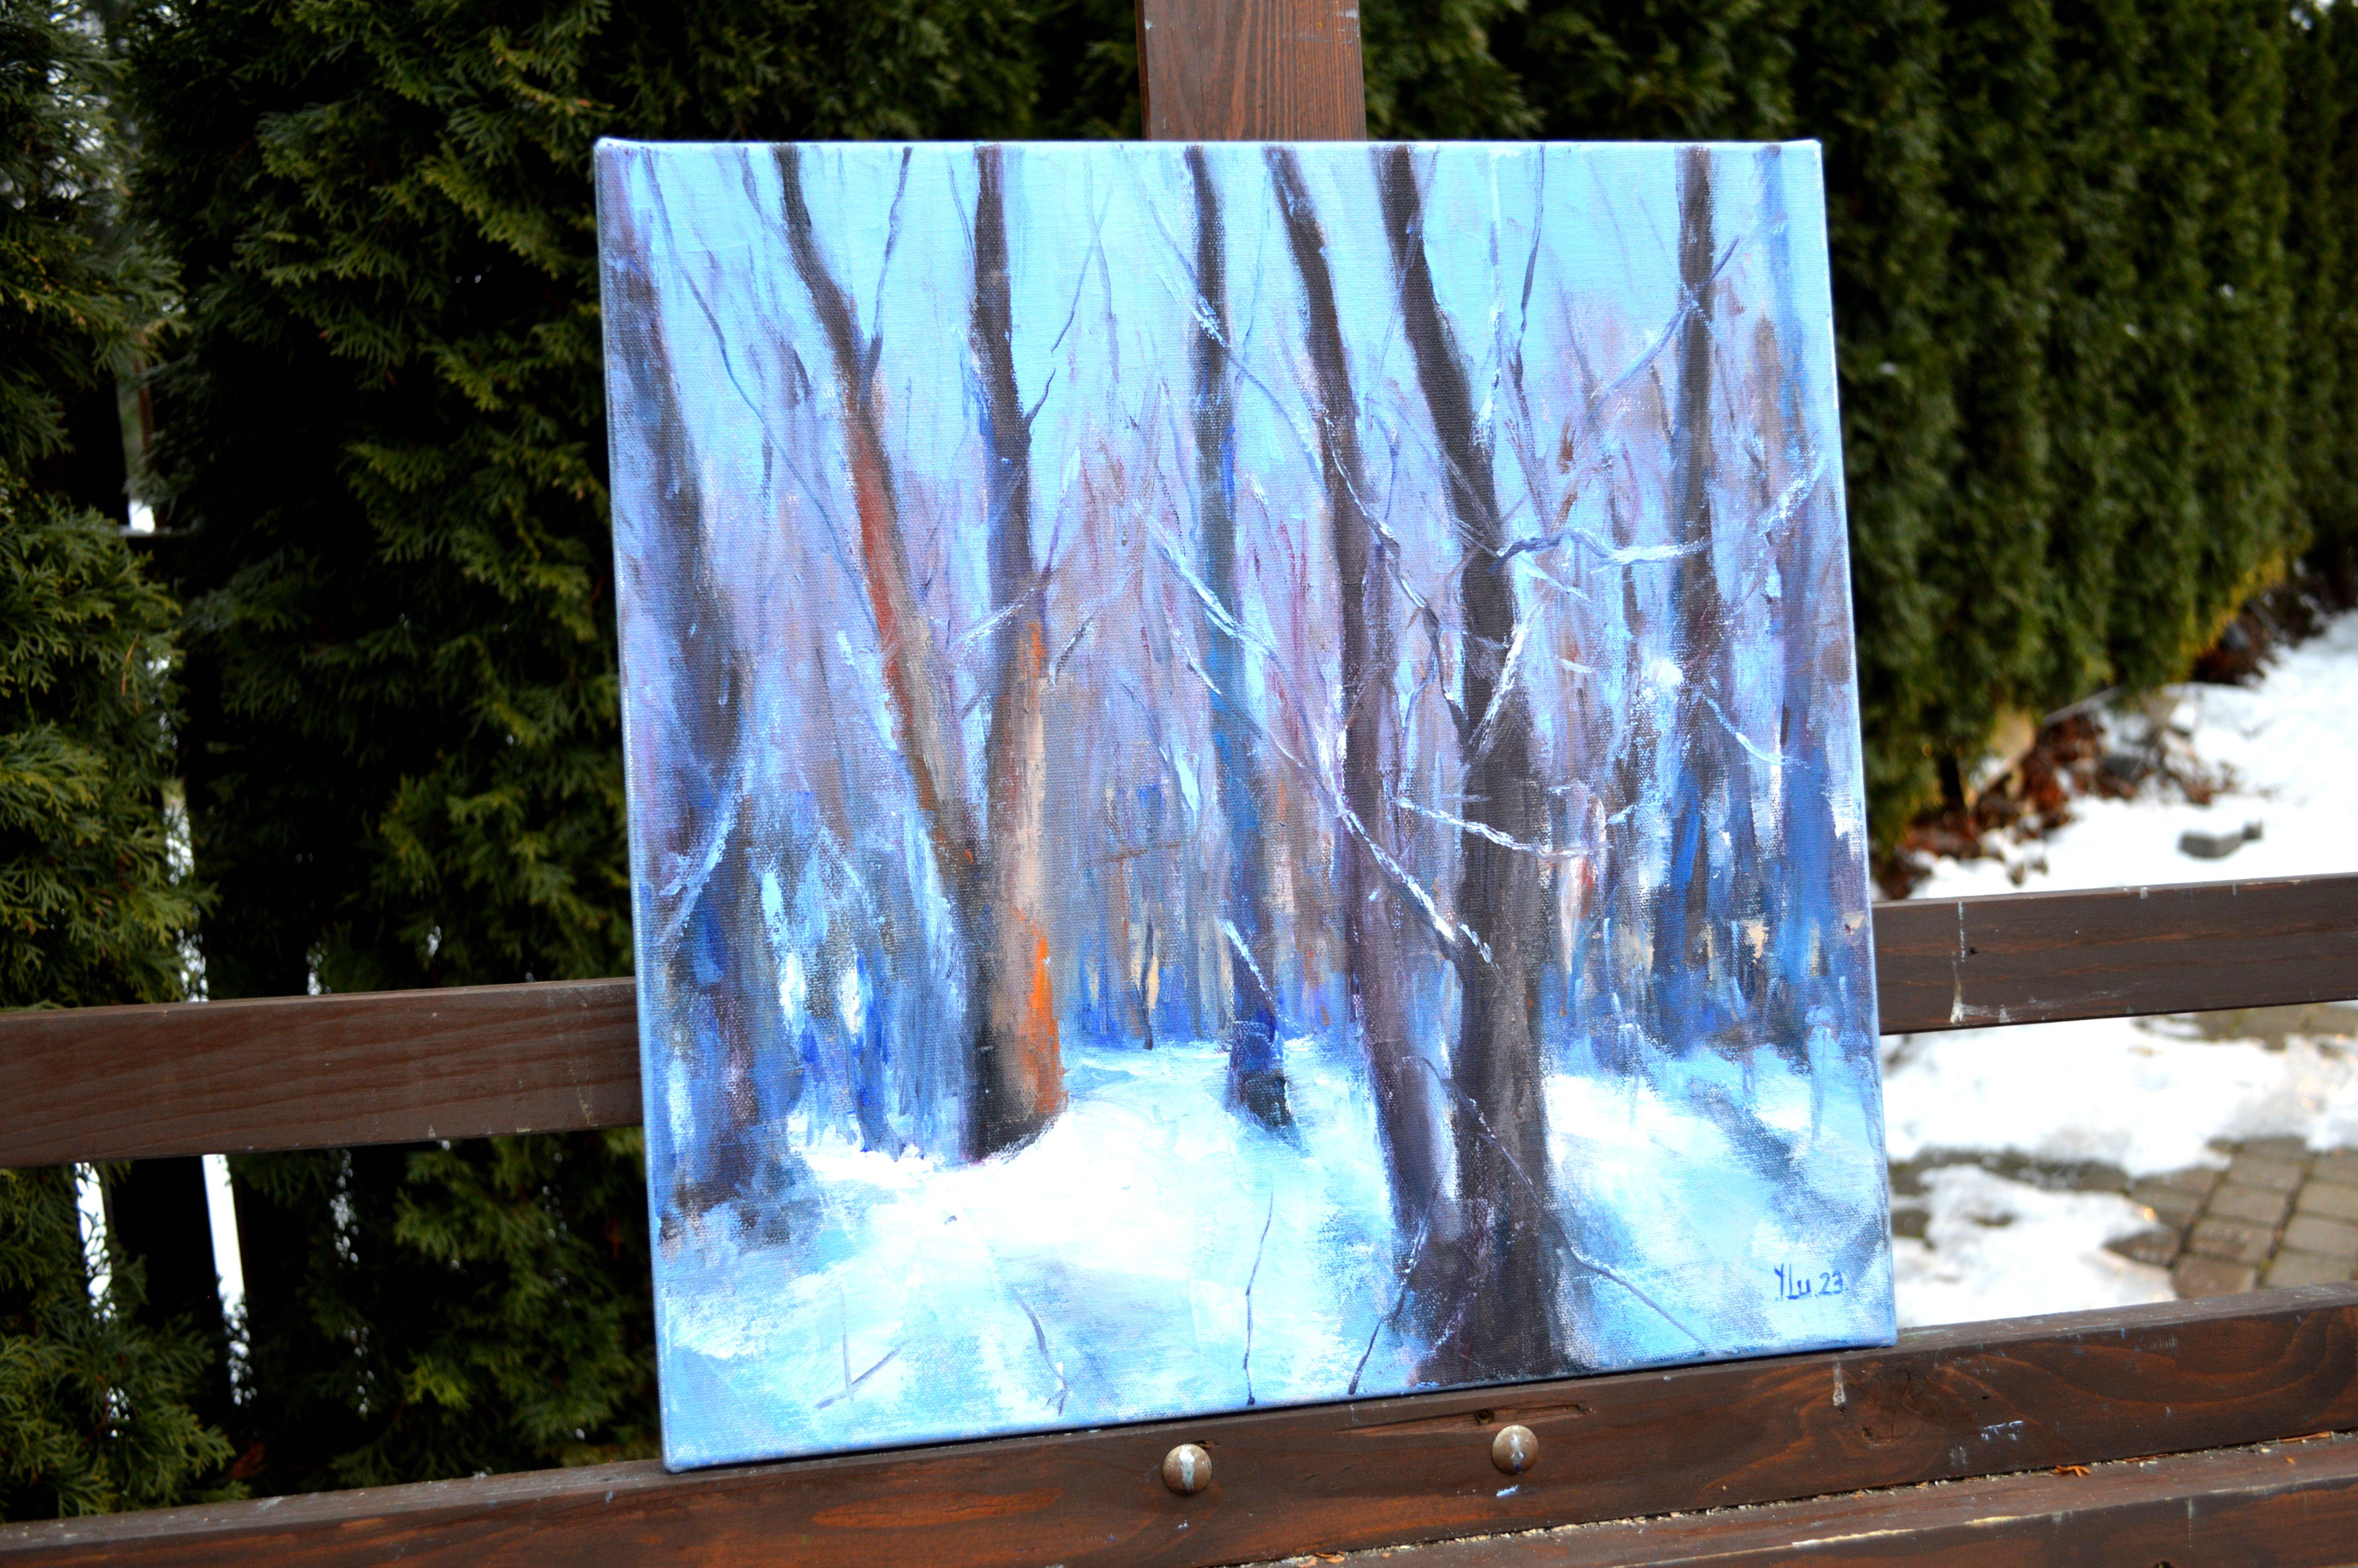 I poured my soul into this canvas, channeling the serene stillness and gentle crispness of a January day. With oils, I melded impressionism and expressionism, capturing the dance between light and shadows among the slumbering trees. My brushstrokes